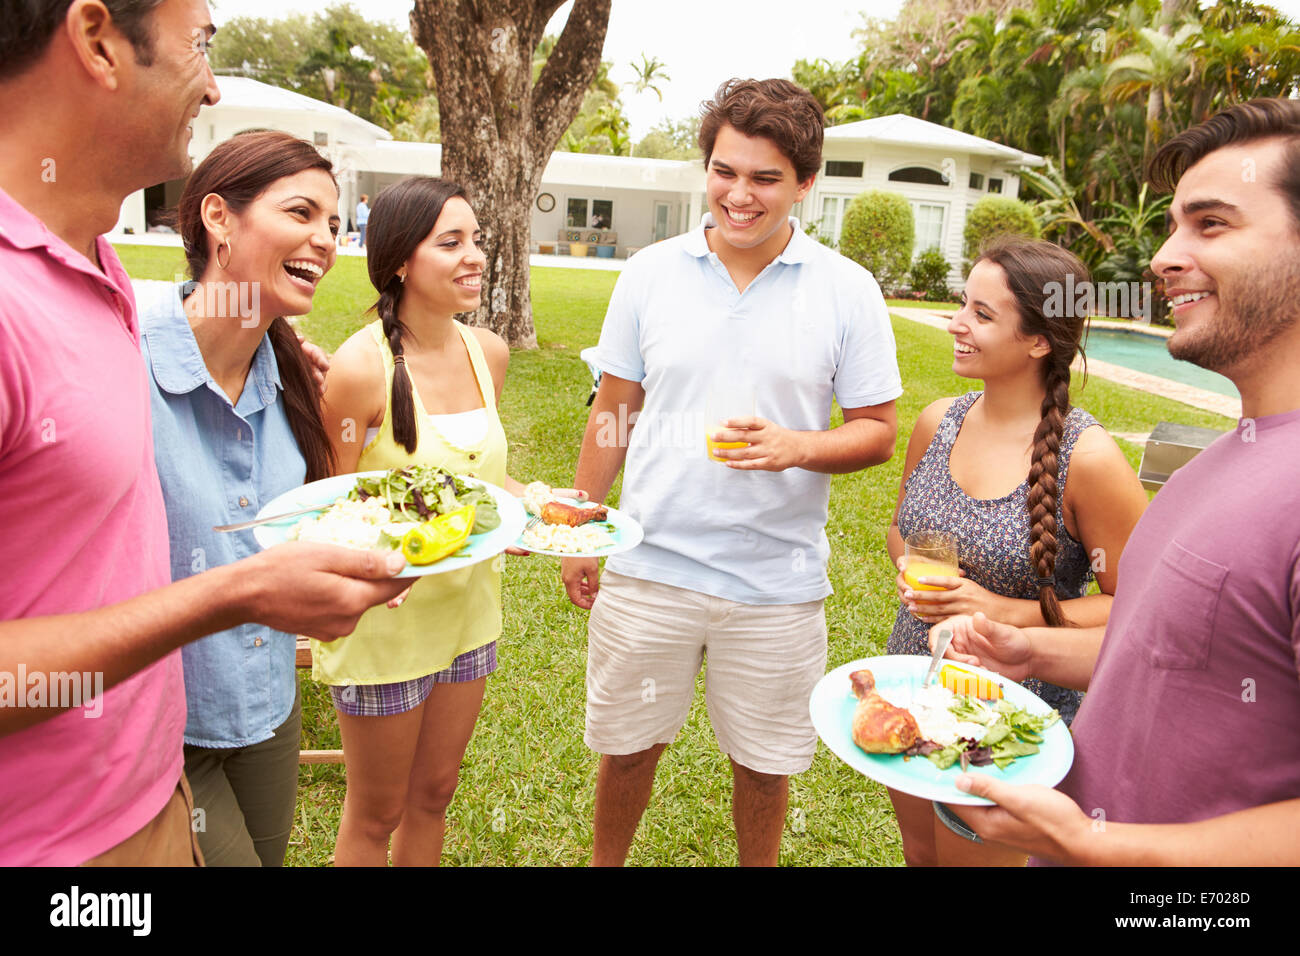 Group Of Friends Having Party In Backyard At Home Stock Photo